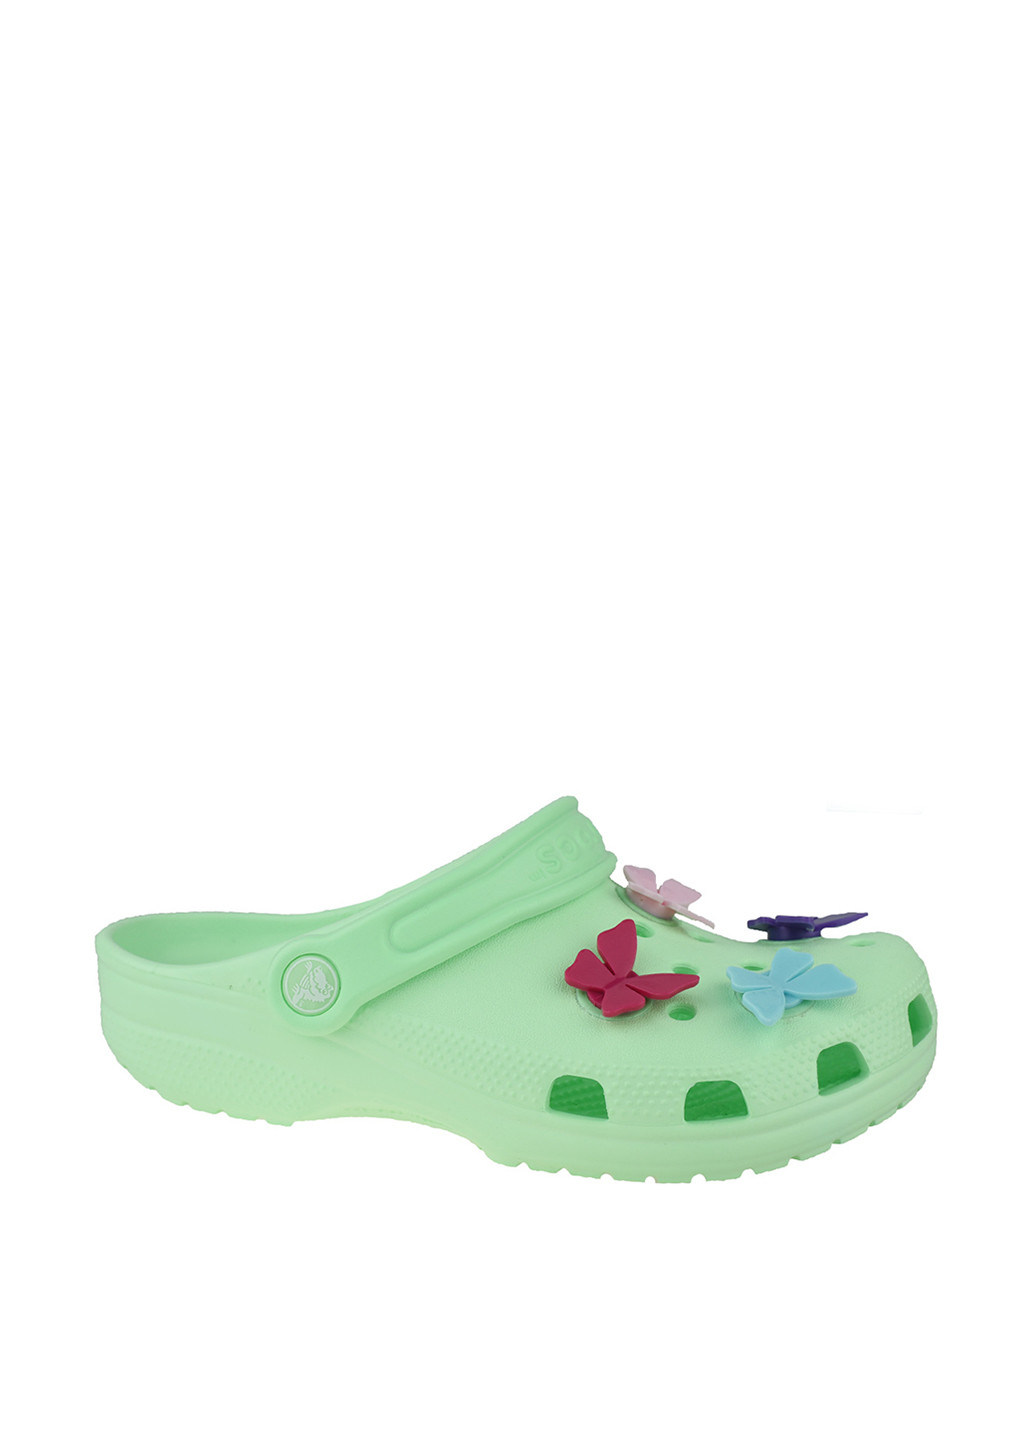 Сабо Crocs classic butterfly charm clg ps nmn (224418156)